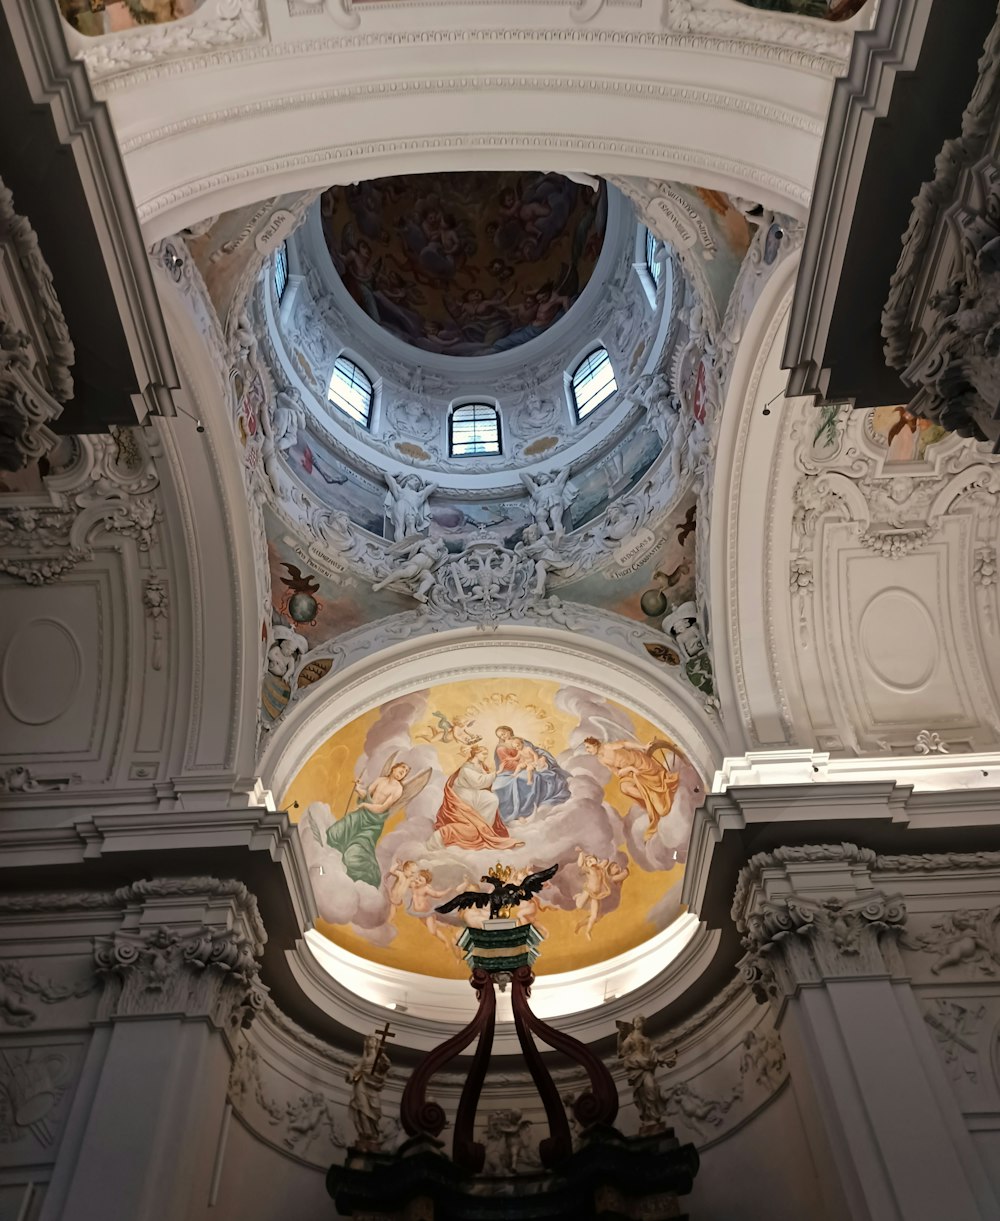 a large ornate ceiling with a painting